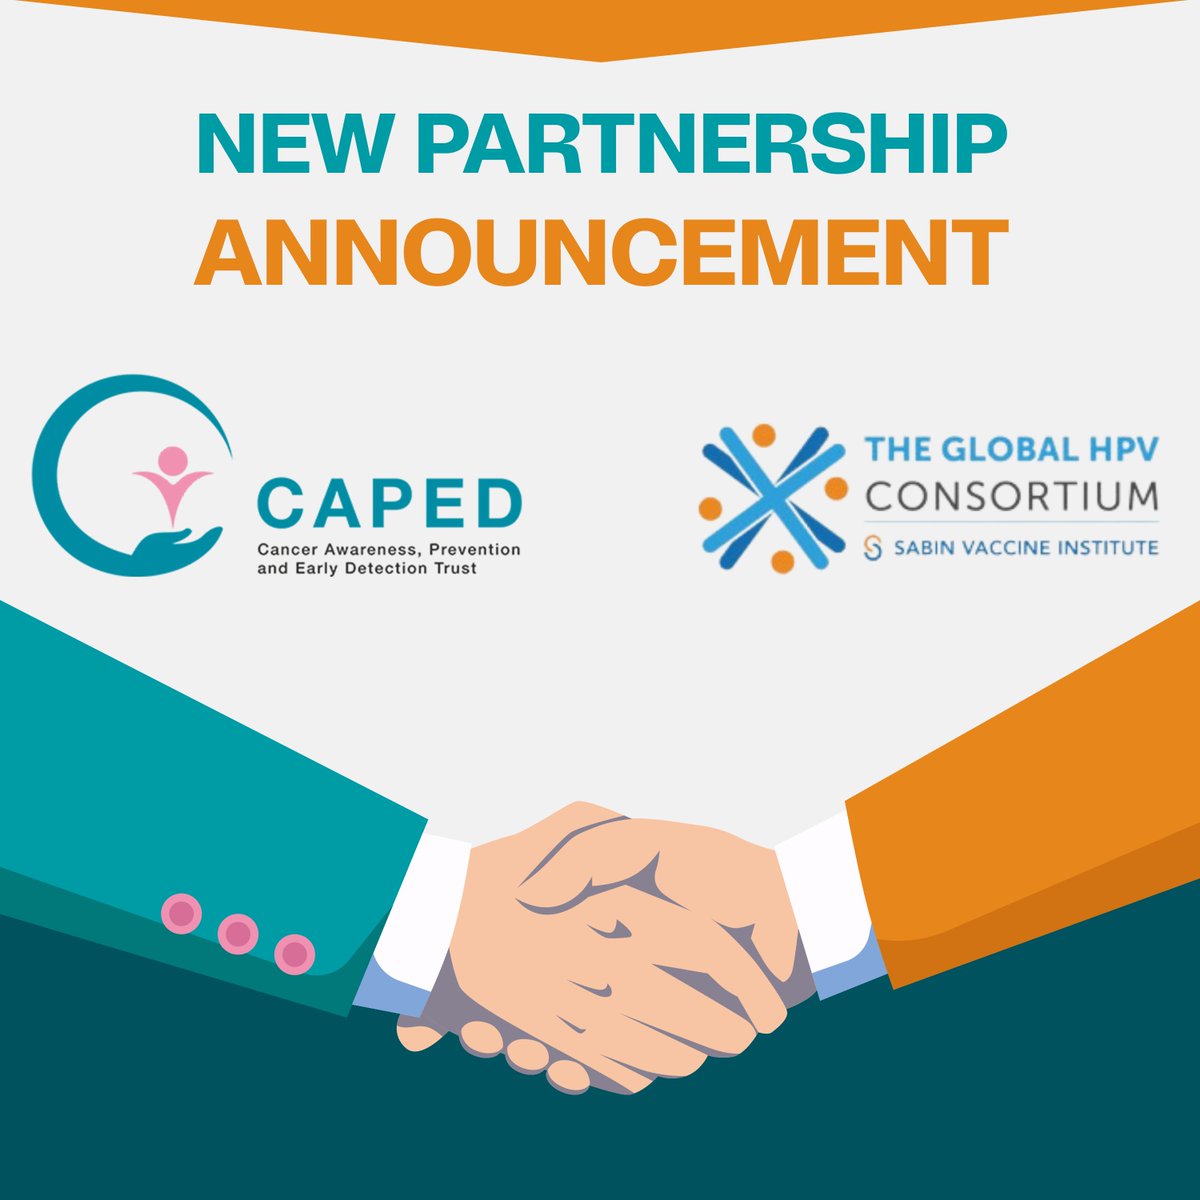 CAPED India is thrilled to be part of the Global HPV Consortium launching today in Kuala Lumpur, Malaysia as the Consortium's technical & advocacy partner.
#GlobalHPVConsortium #HPVConsortium #CervicalCancerPrevention #VaccinesWork #VaccinesSaveLives #HPVPrevention #vaccineswork